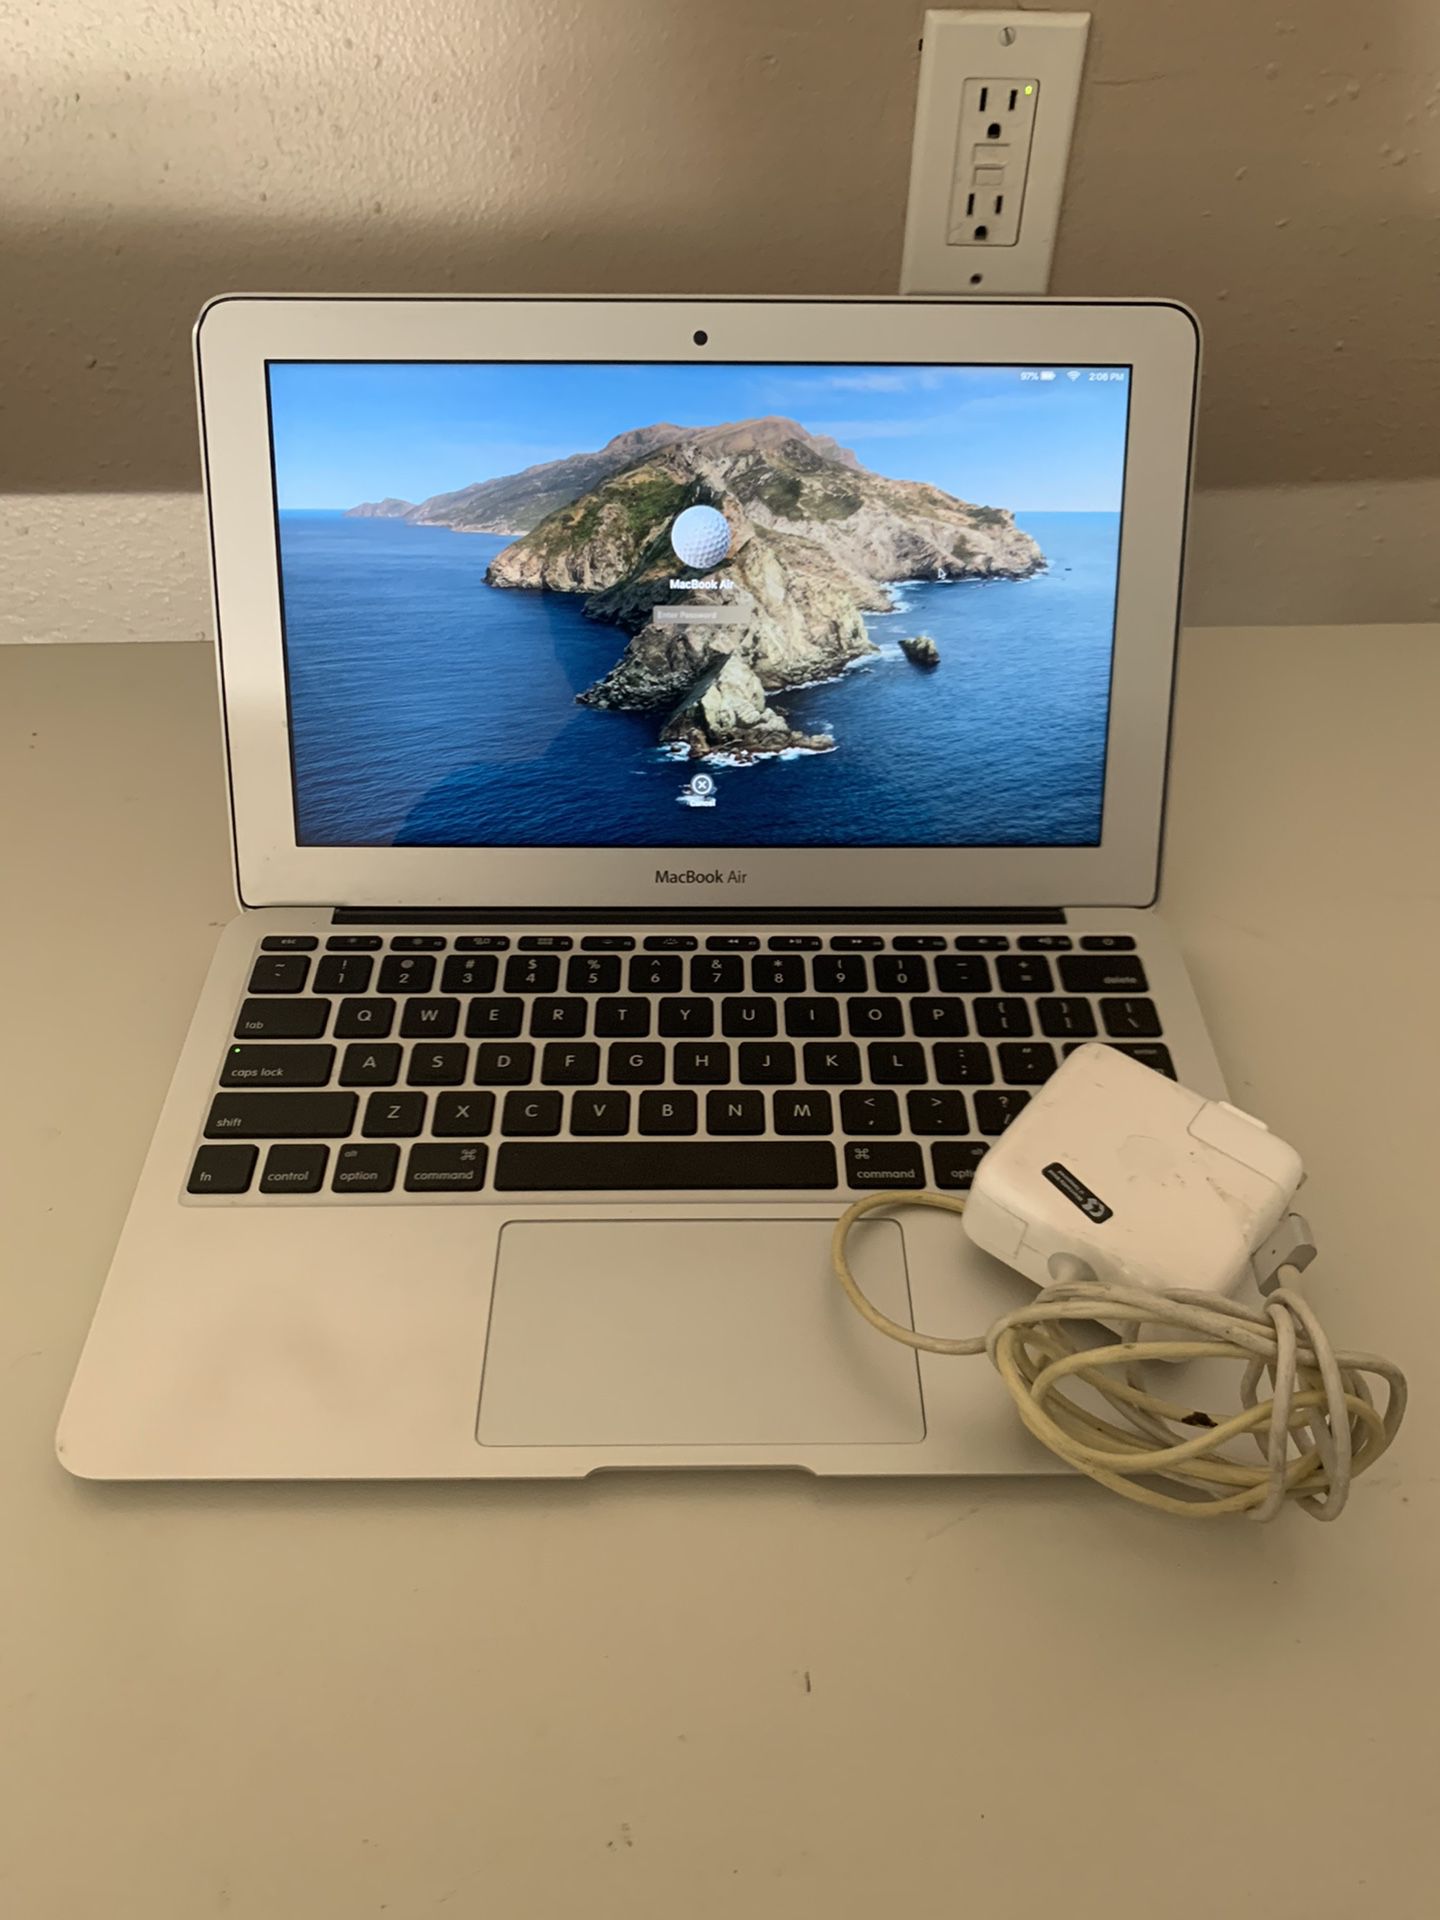 Mac book air 2013/11 inch with original charger